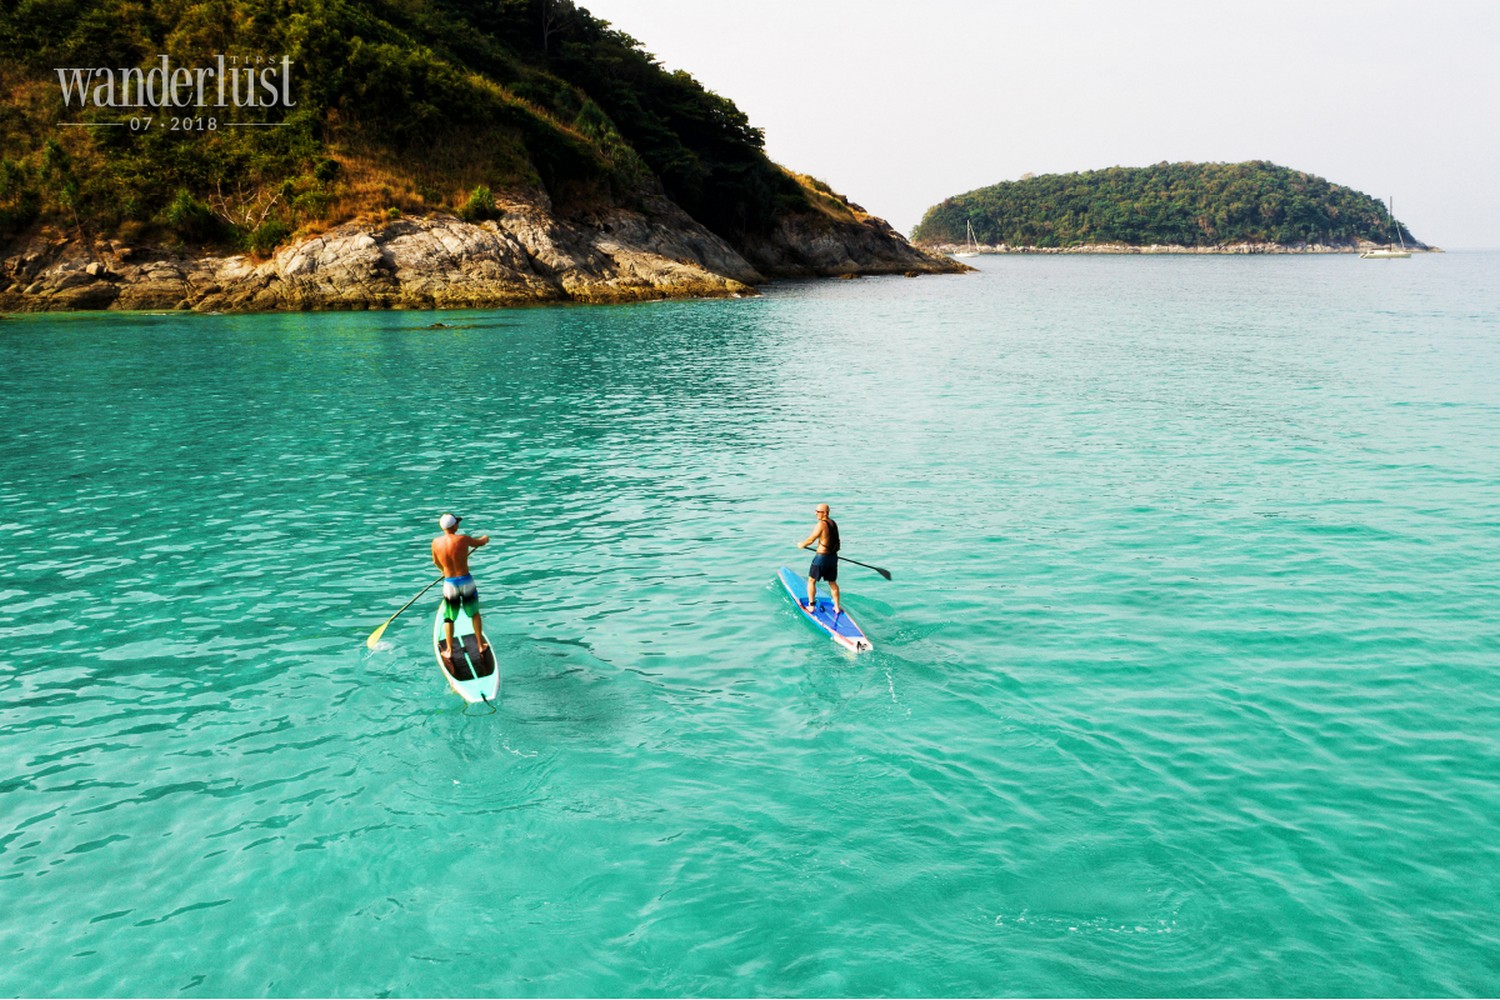 Wanderlust Tips Magazine | Stand-up Paddle boarding being adrift a faraway land (part 2)